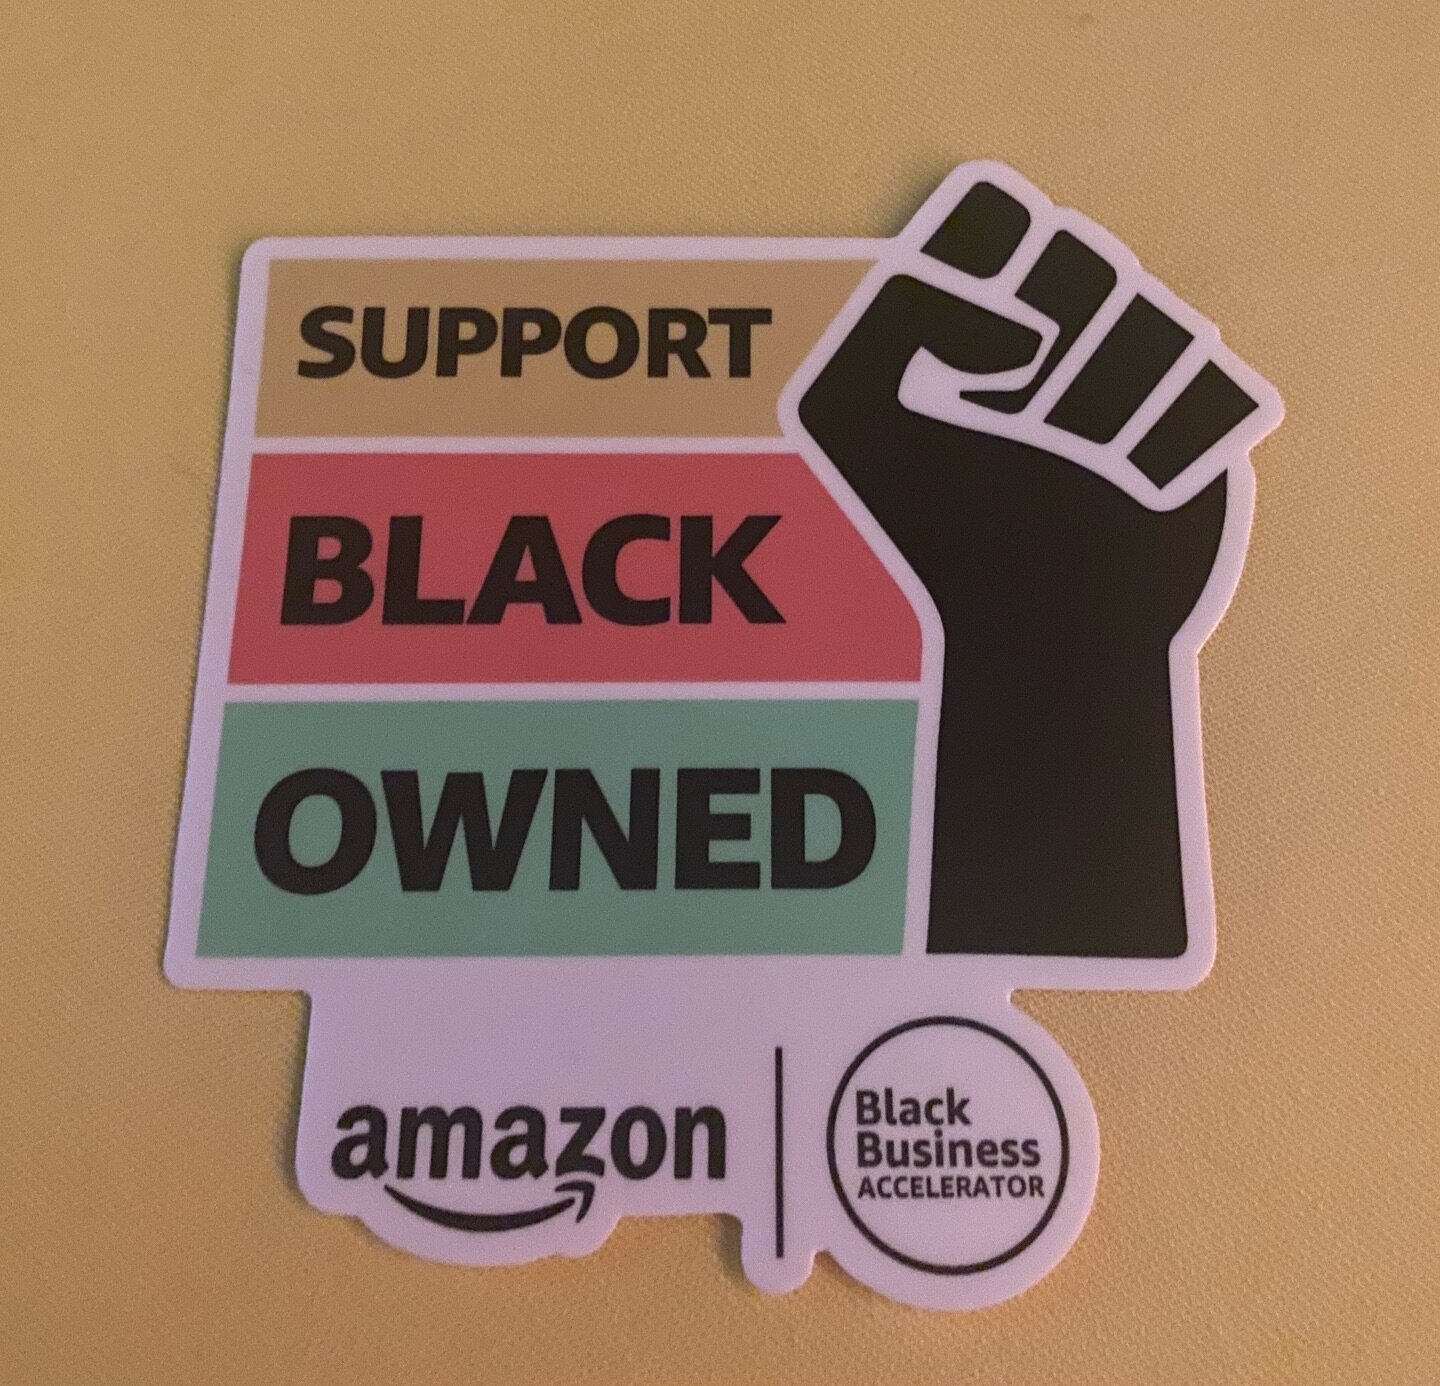 Amazon has an amazing program to help educate lift the black owned business in there journey! So glad we are with this mama house company! @adr1600